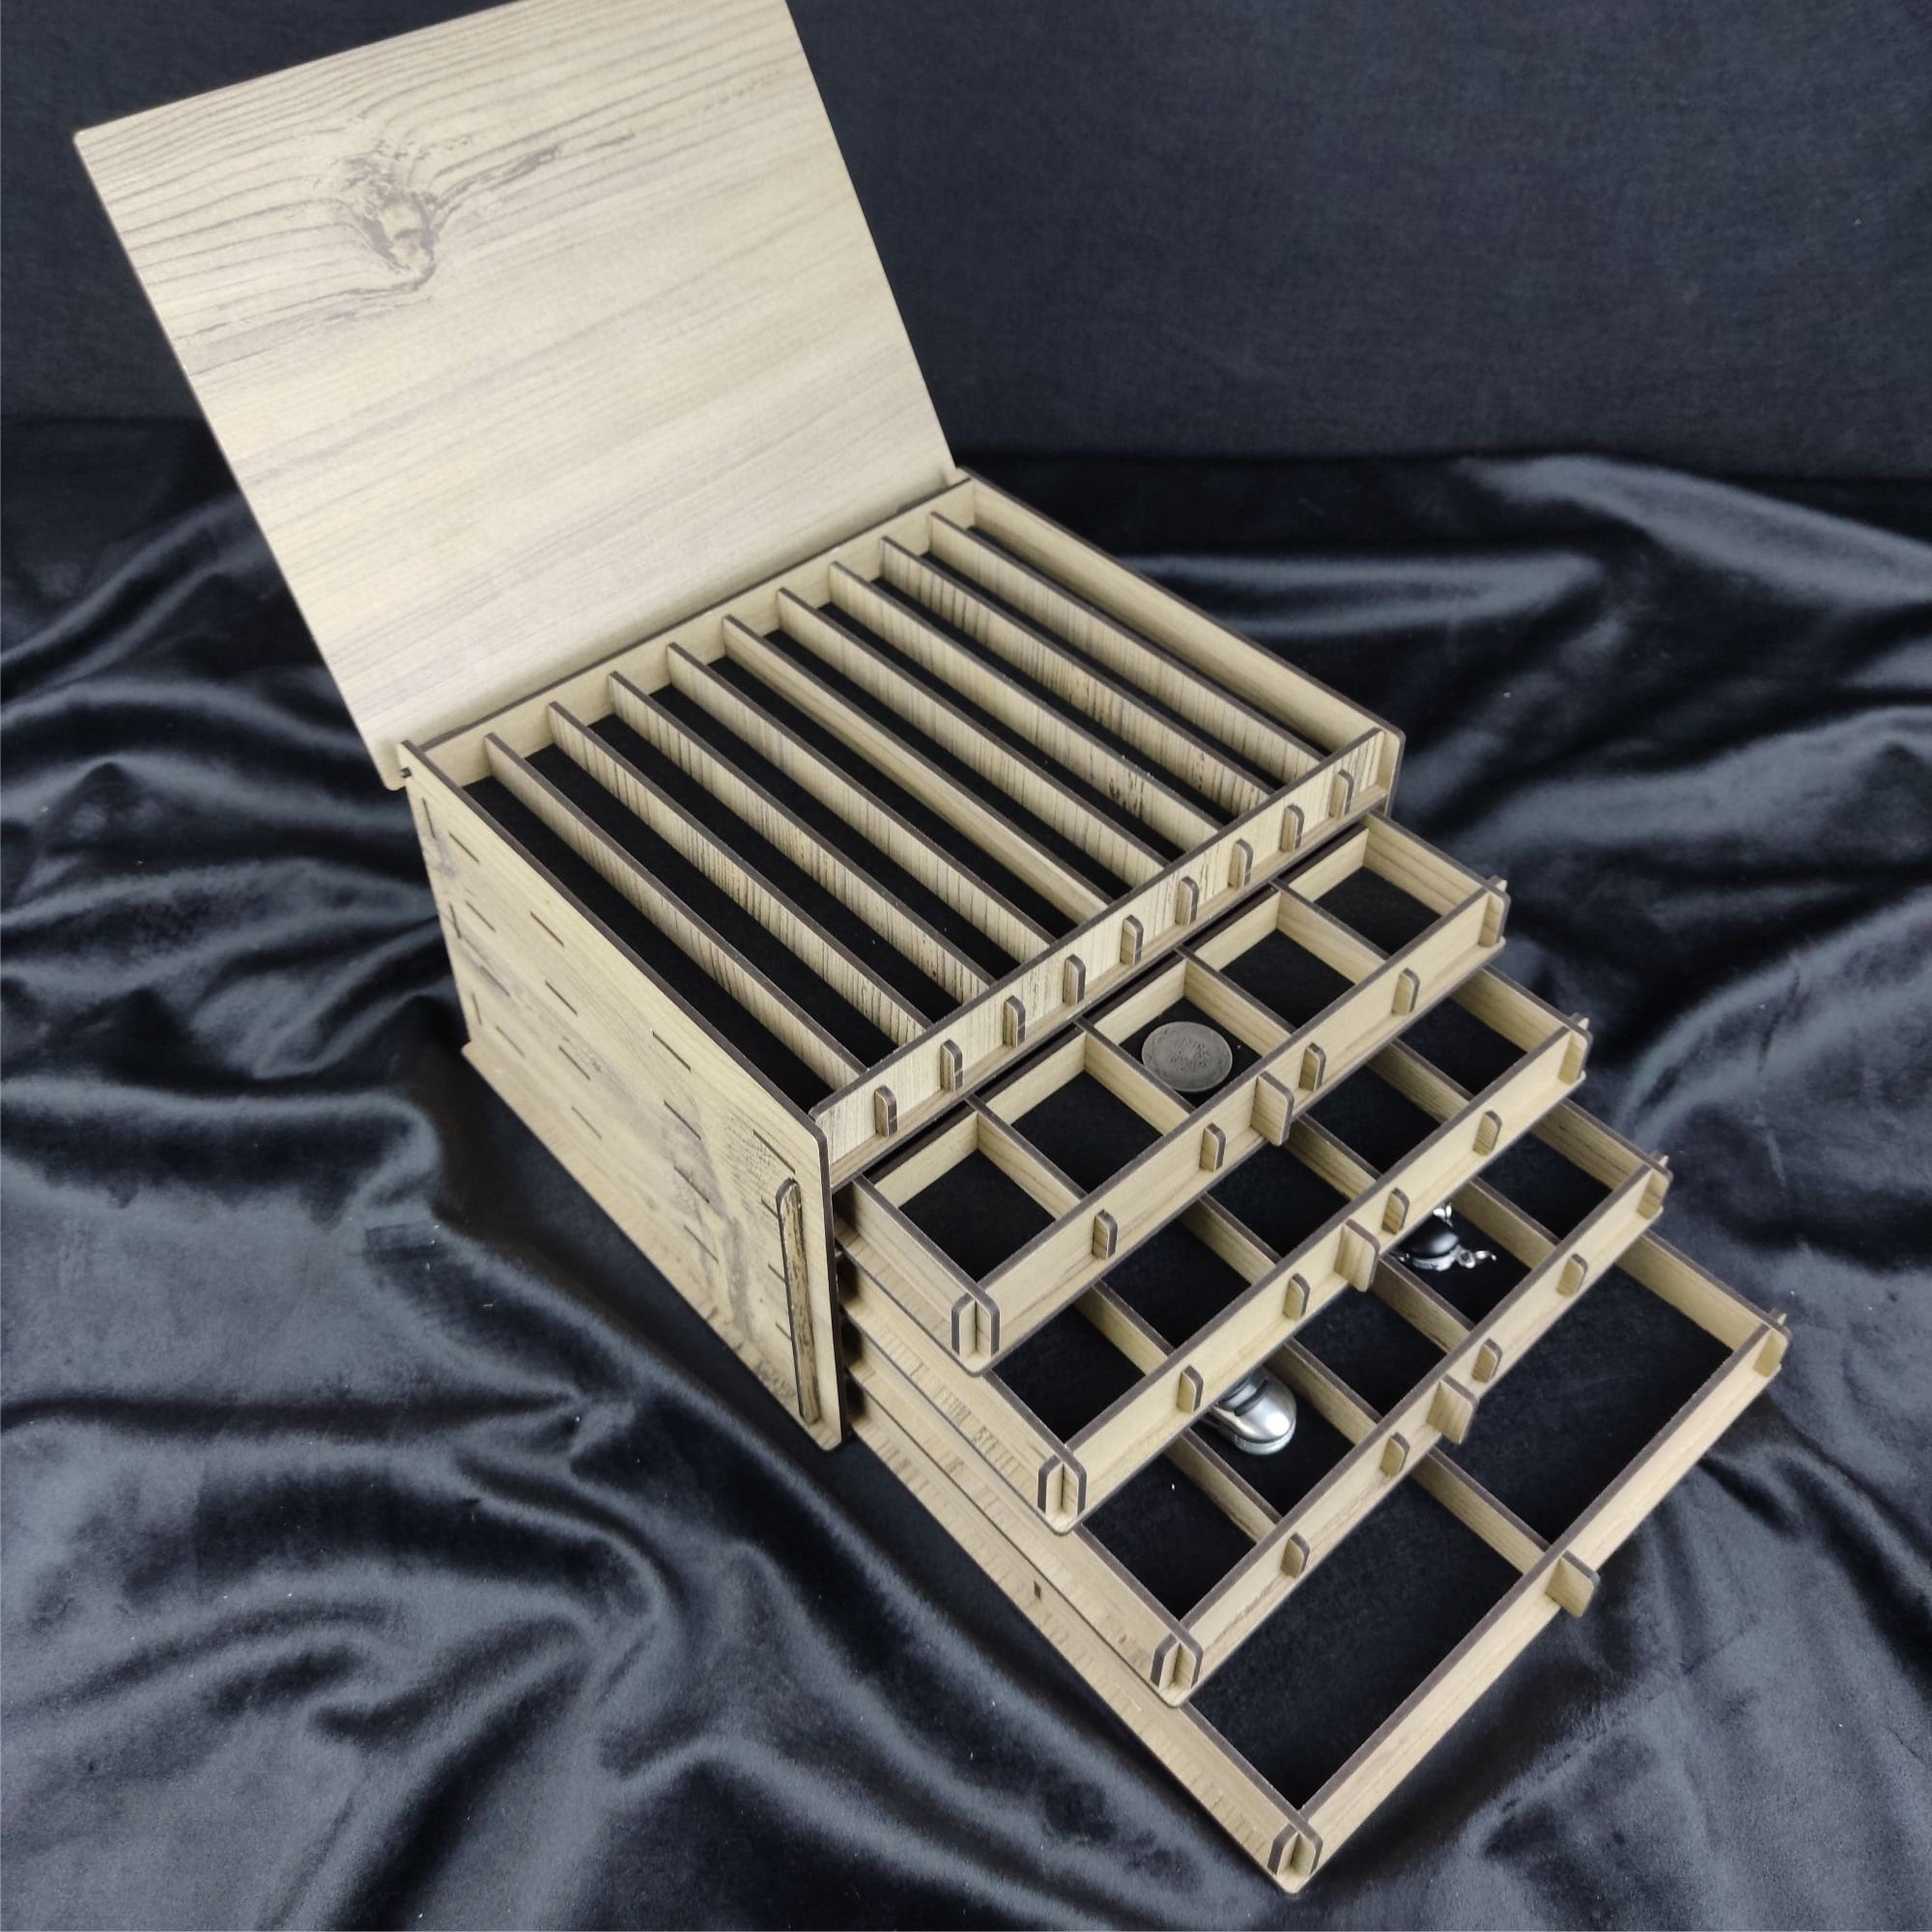 Wooden Crate Gift Box, Made In Texas Gifts